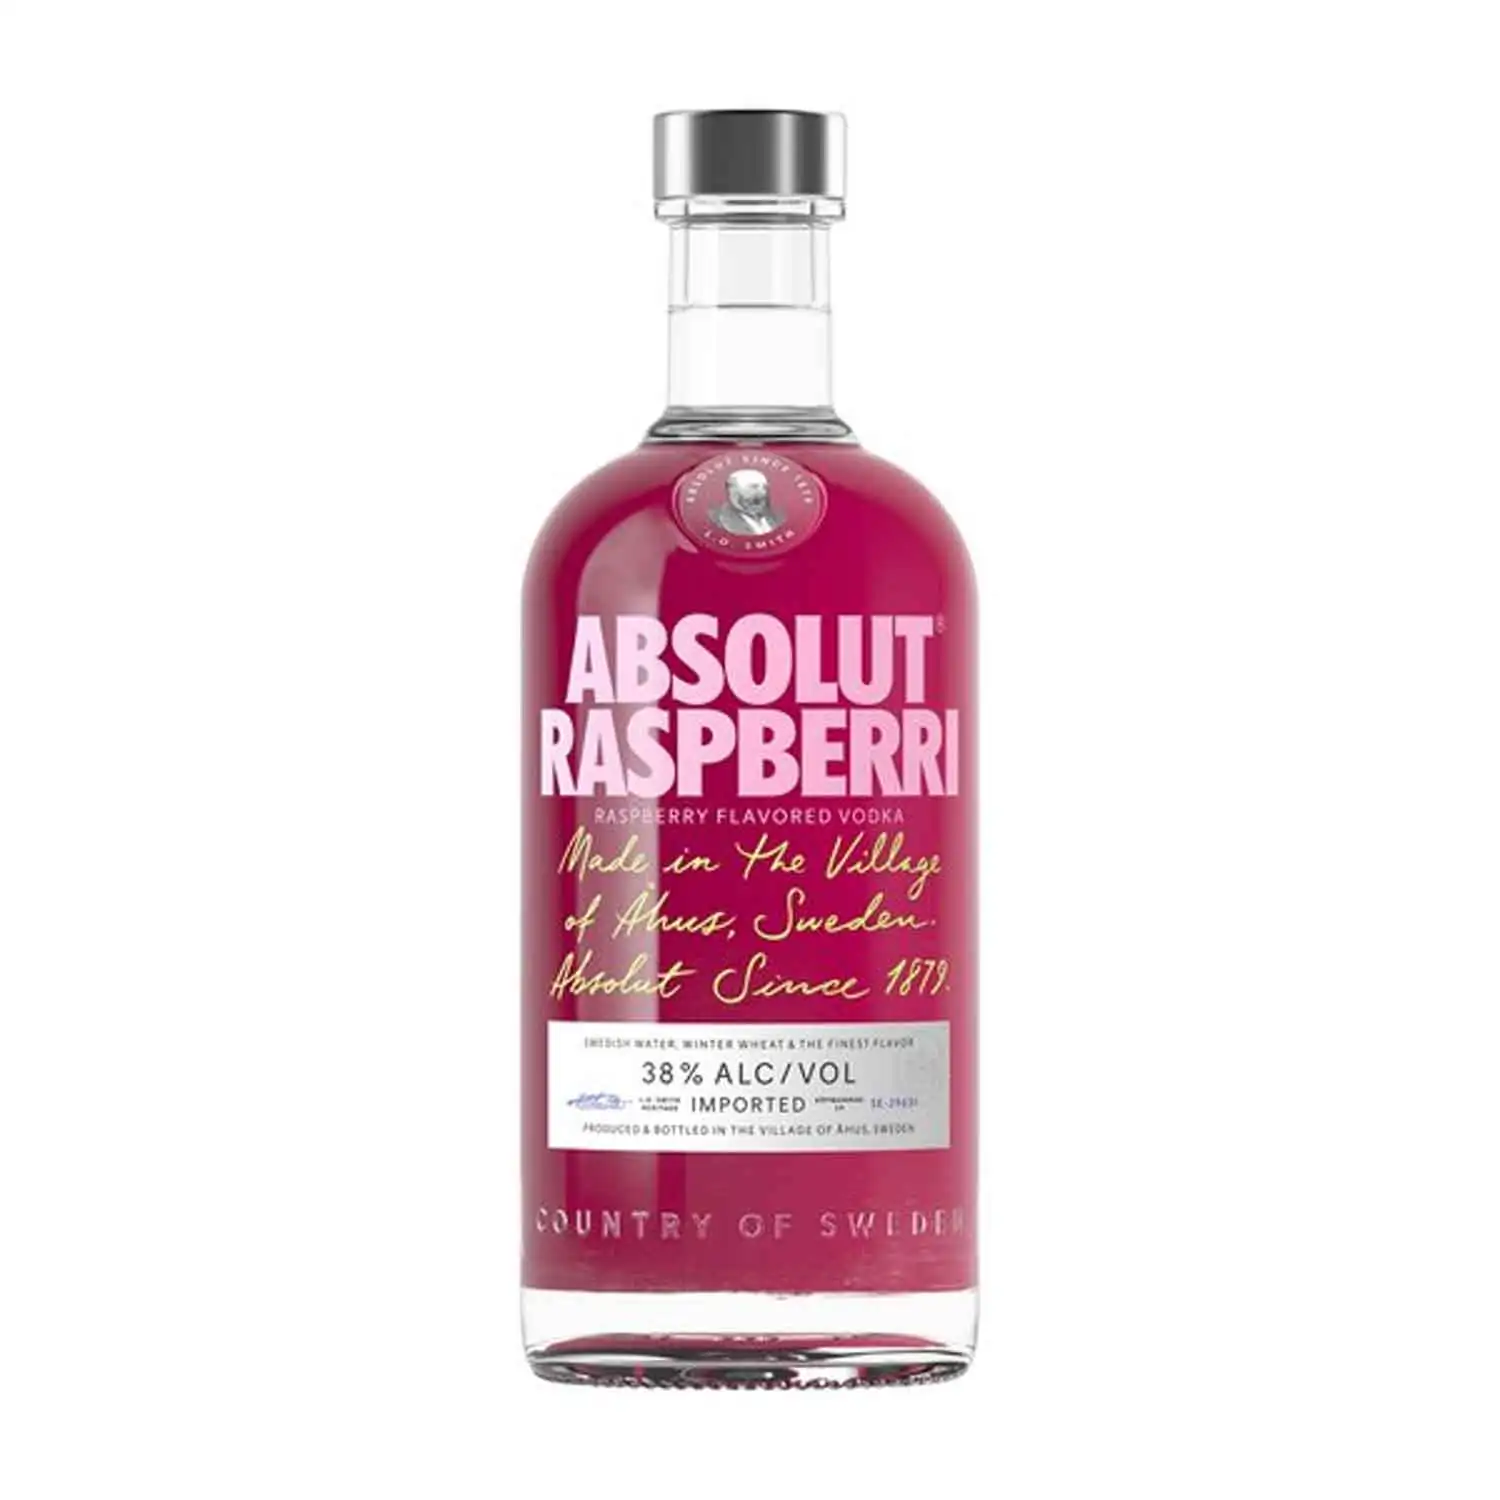 Absolut framboise 70cl Alc 38% - Buy at Real Tobacco